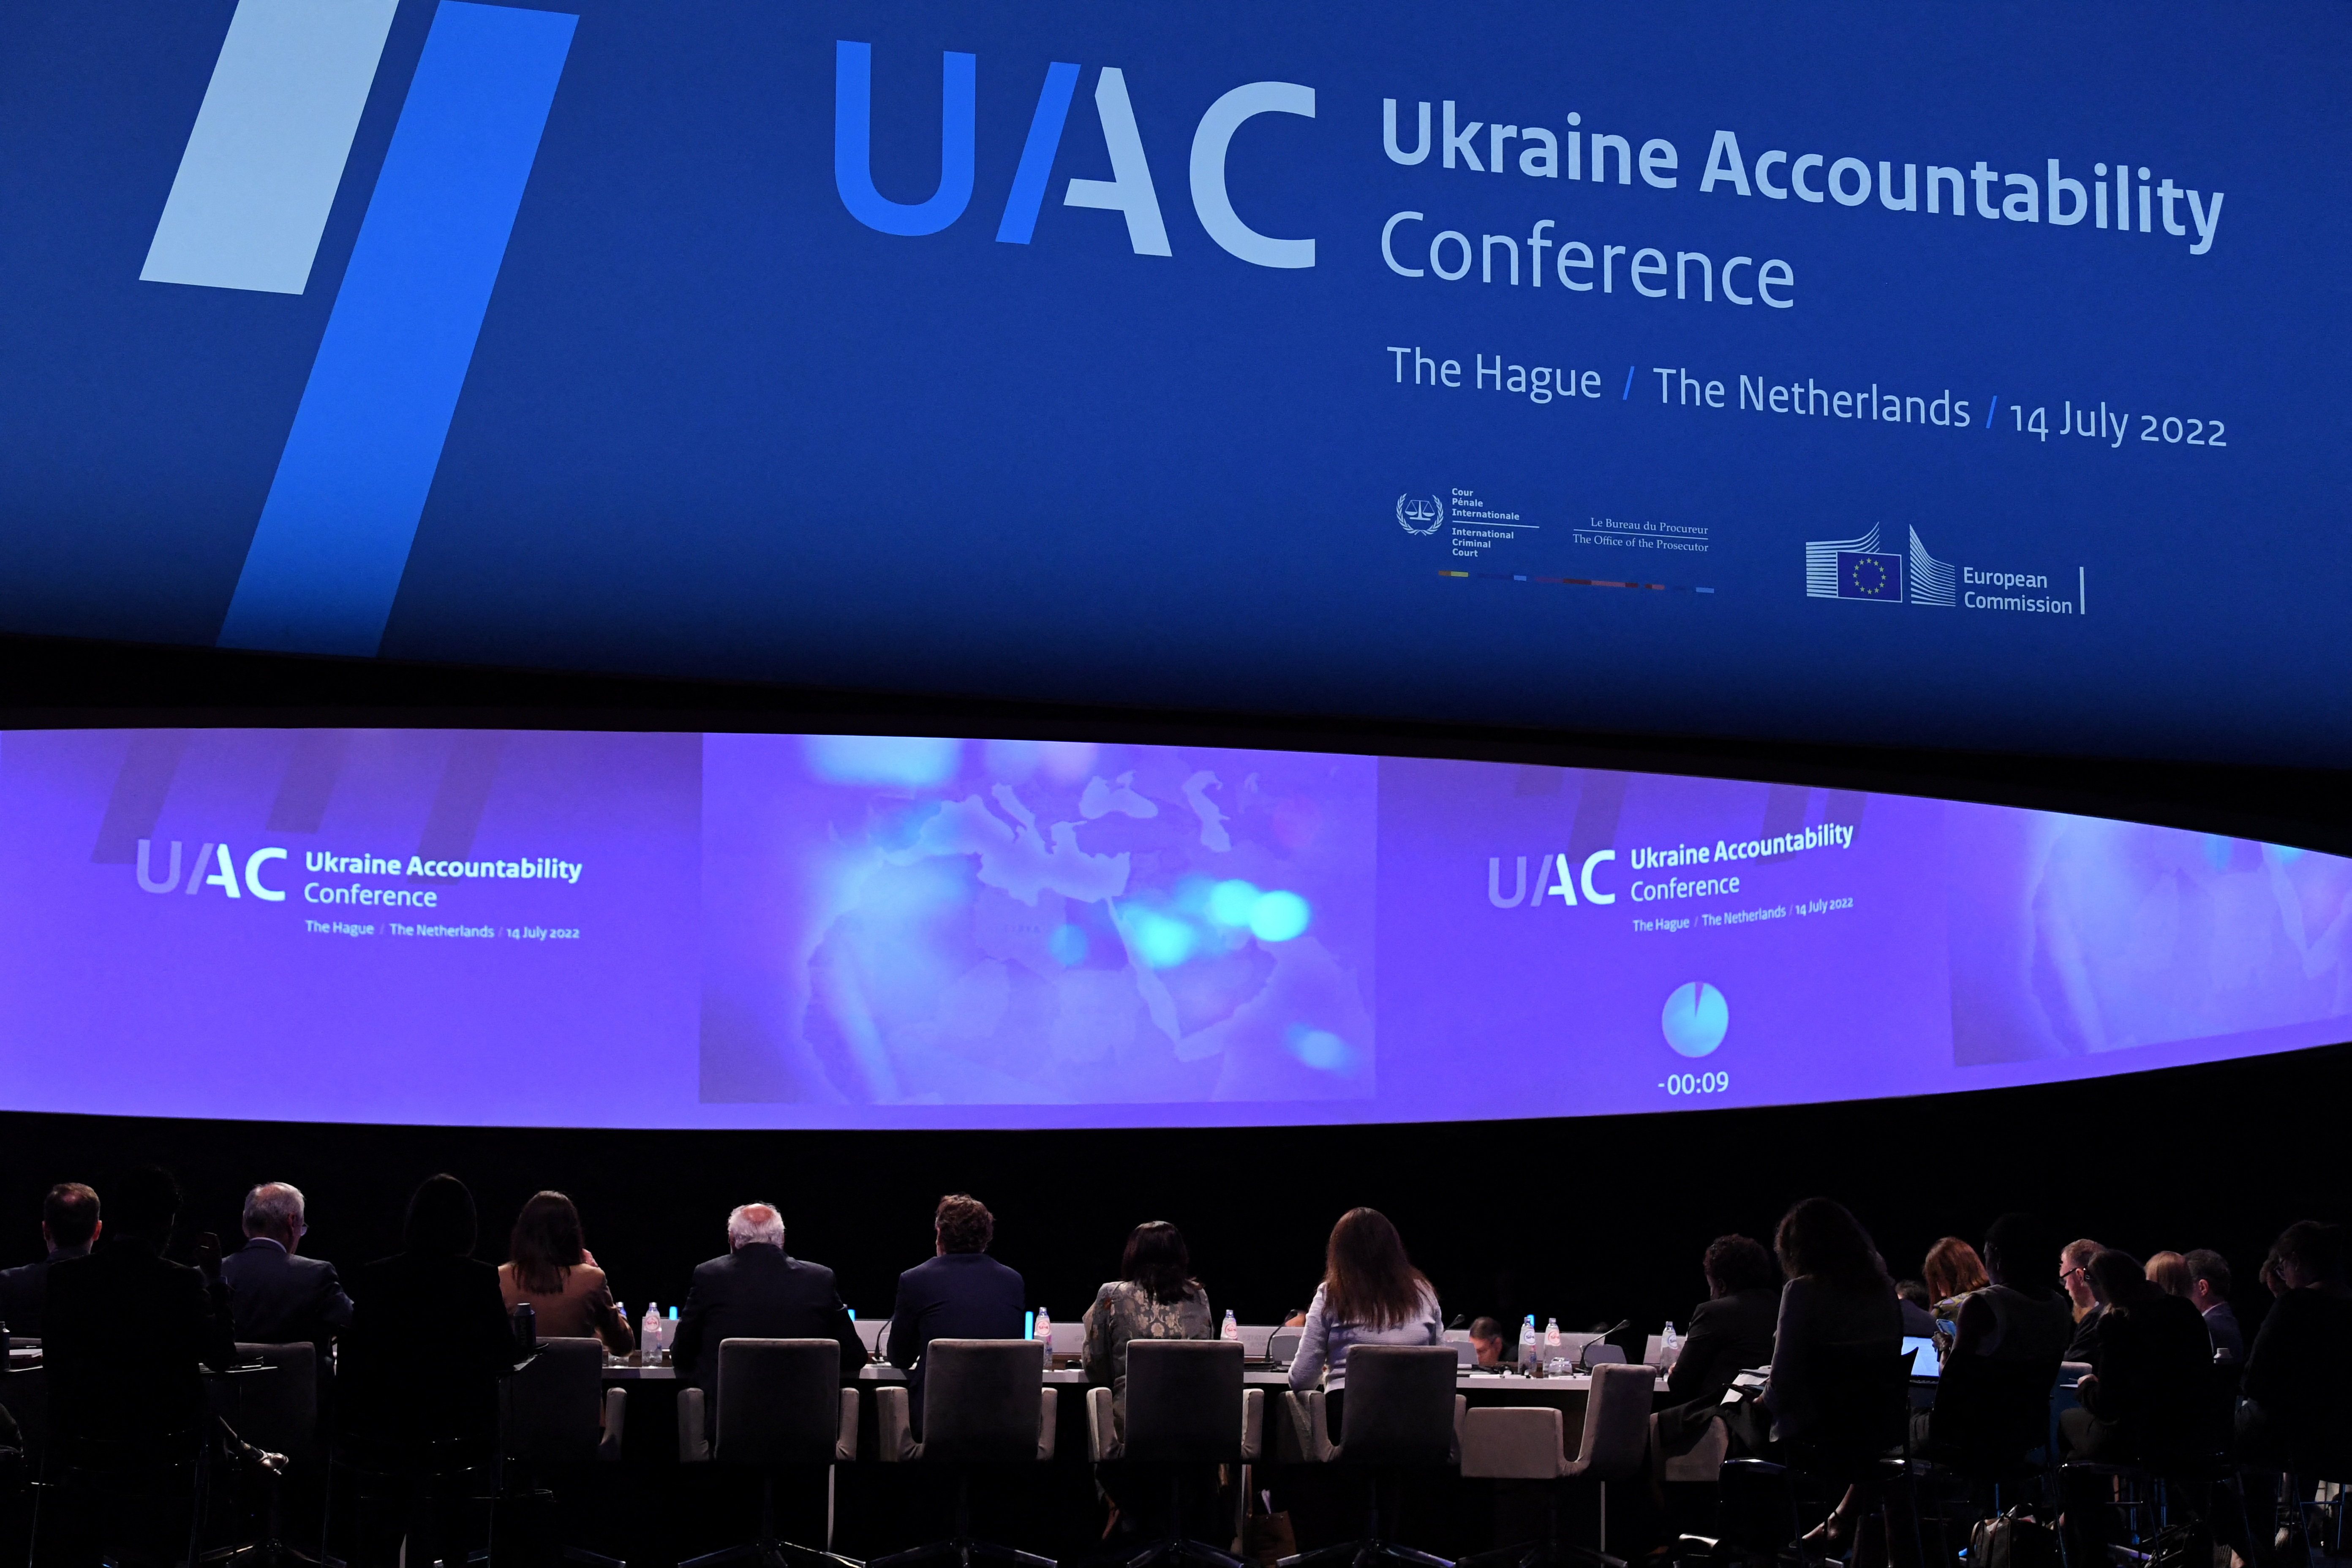 Ukraine Accountability Conference in The Hague